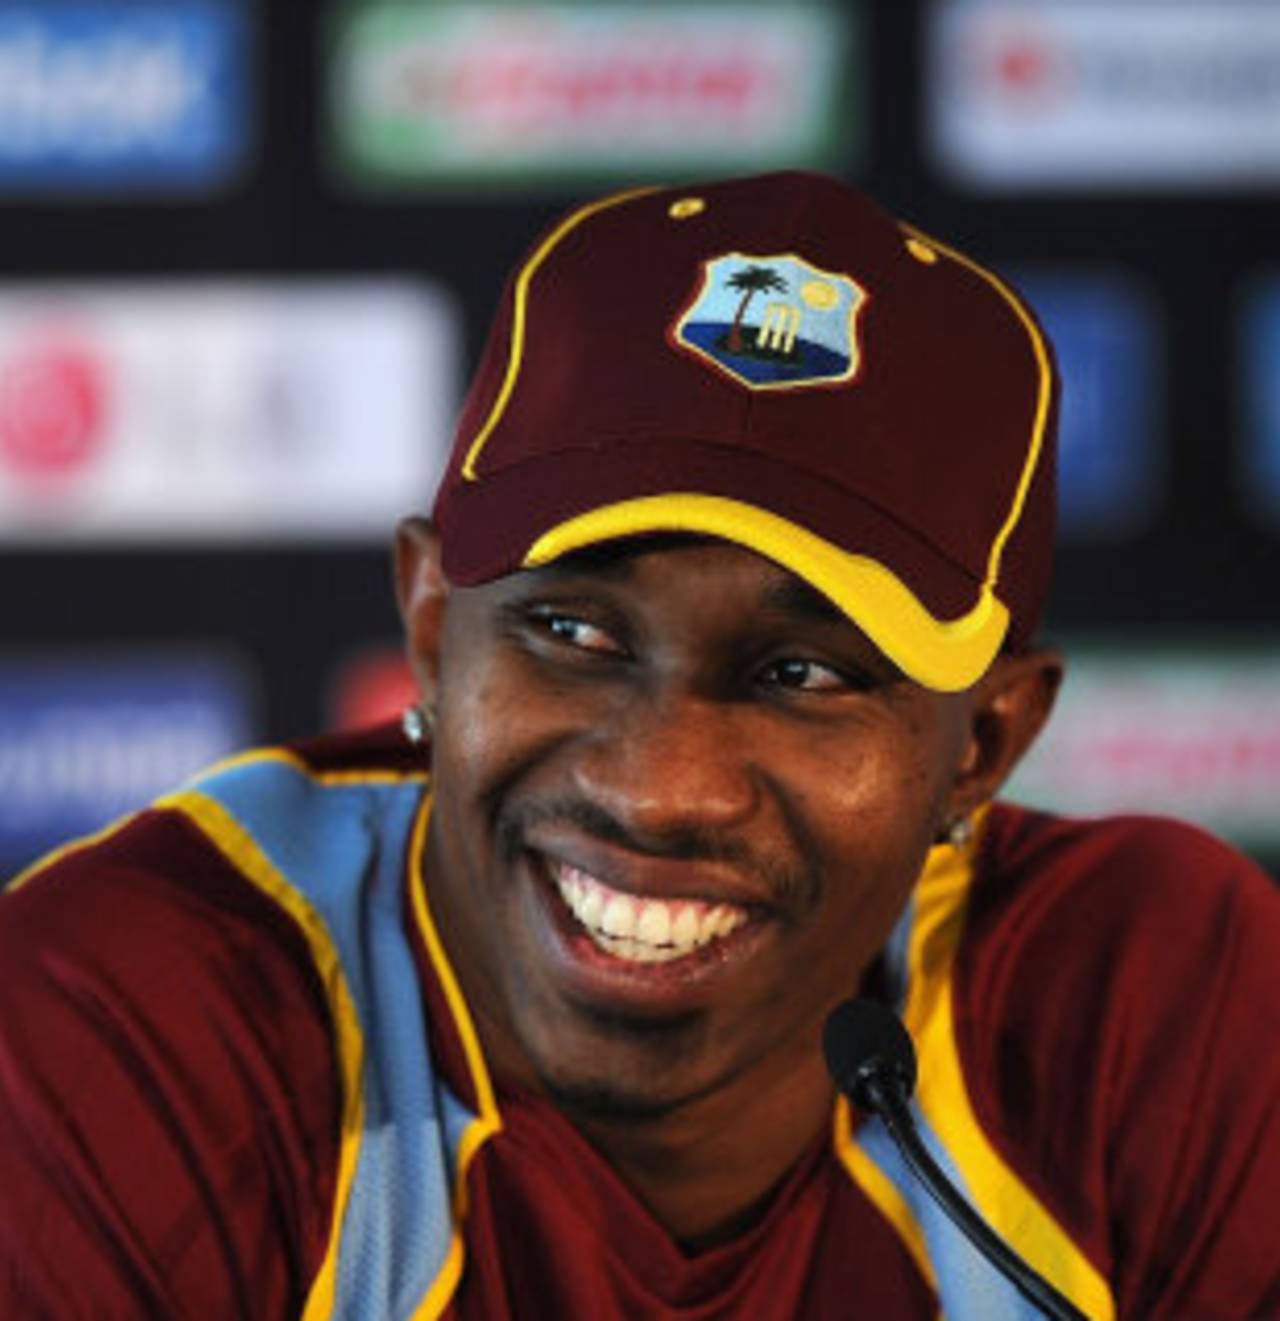 Dwayne Bravo, West Indies' new one-day captain, speaks to the media, Cardiff, May 29, 2013